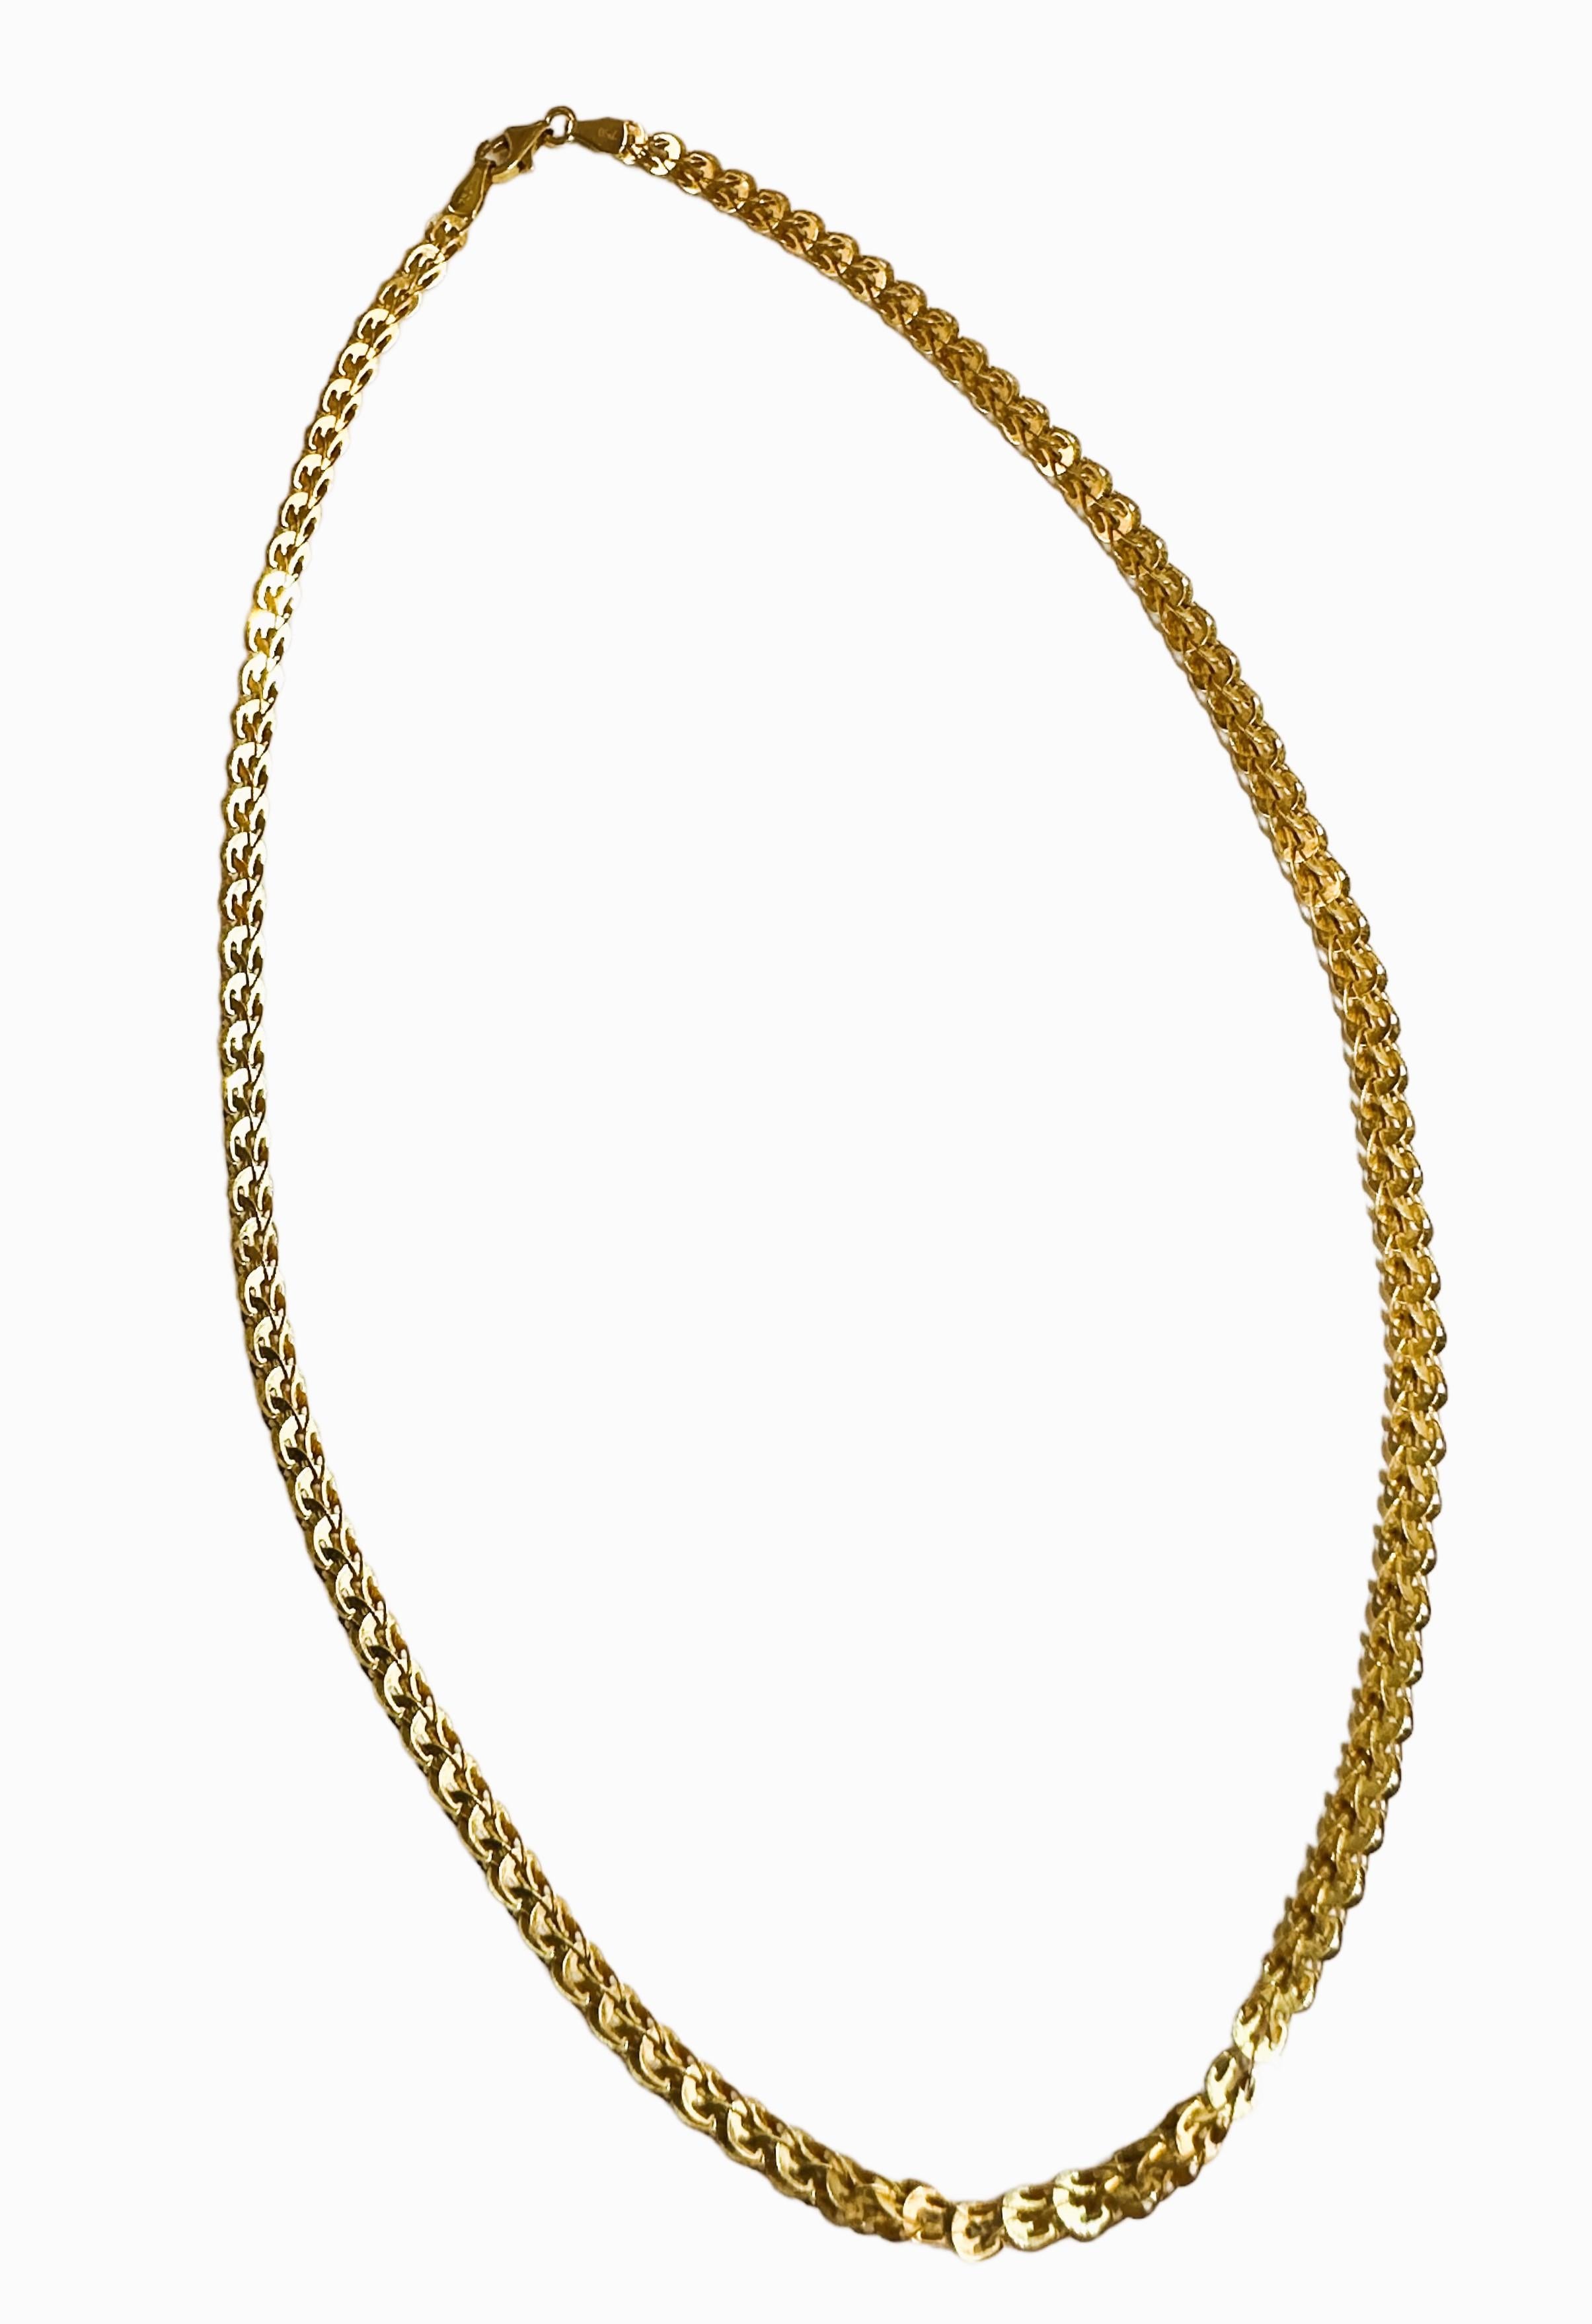 18K Yellow Gold Fancy Link Necklace Chain 16.5 Inches For Sale 3